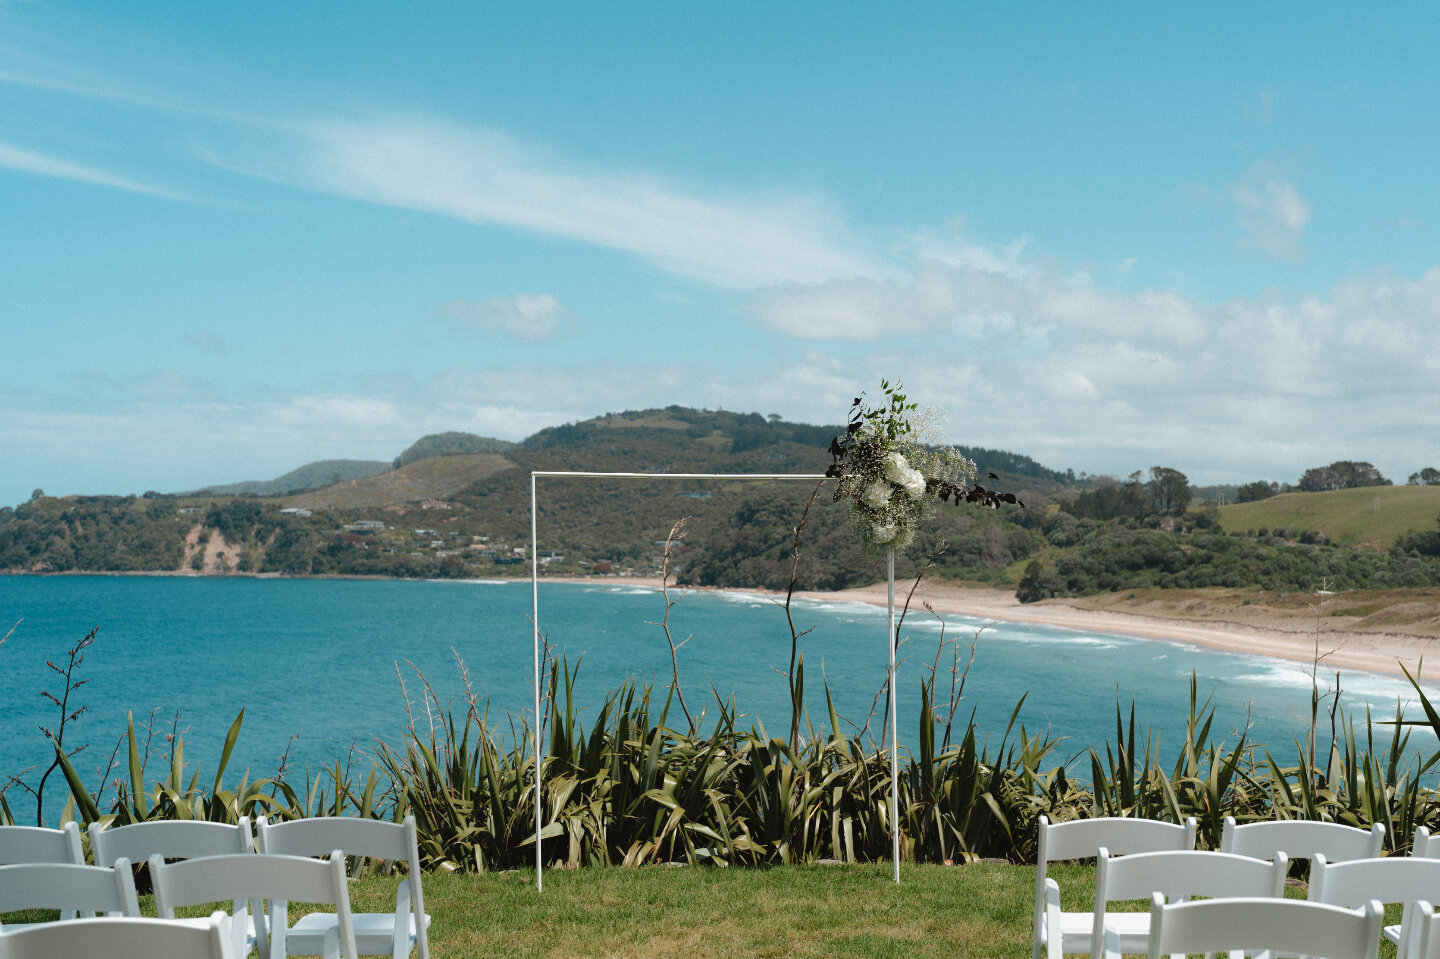 Ceremony set-up feat. our white folding chairs 🌊

Photography: @jonathansuckling